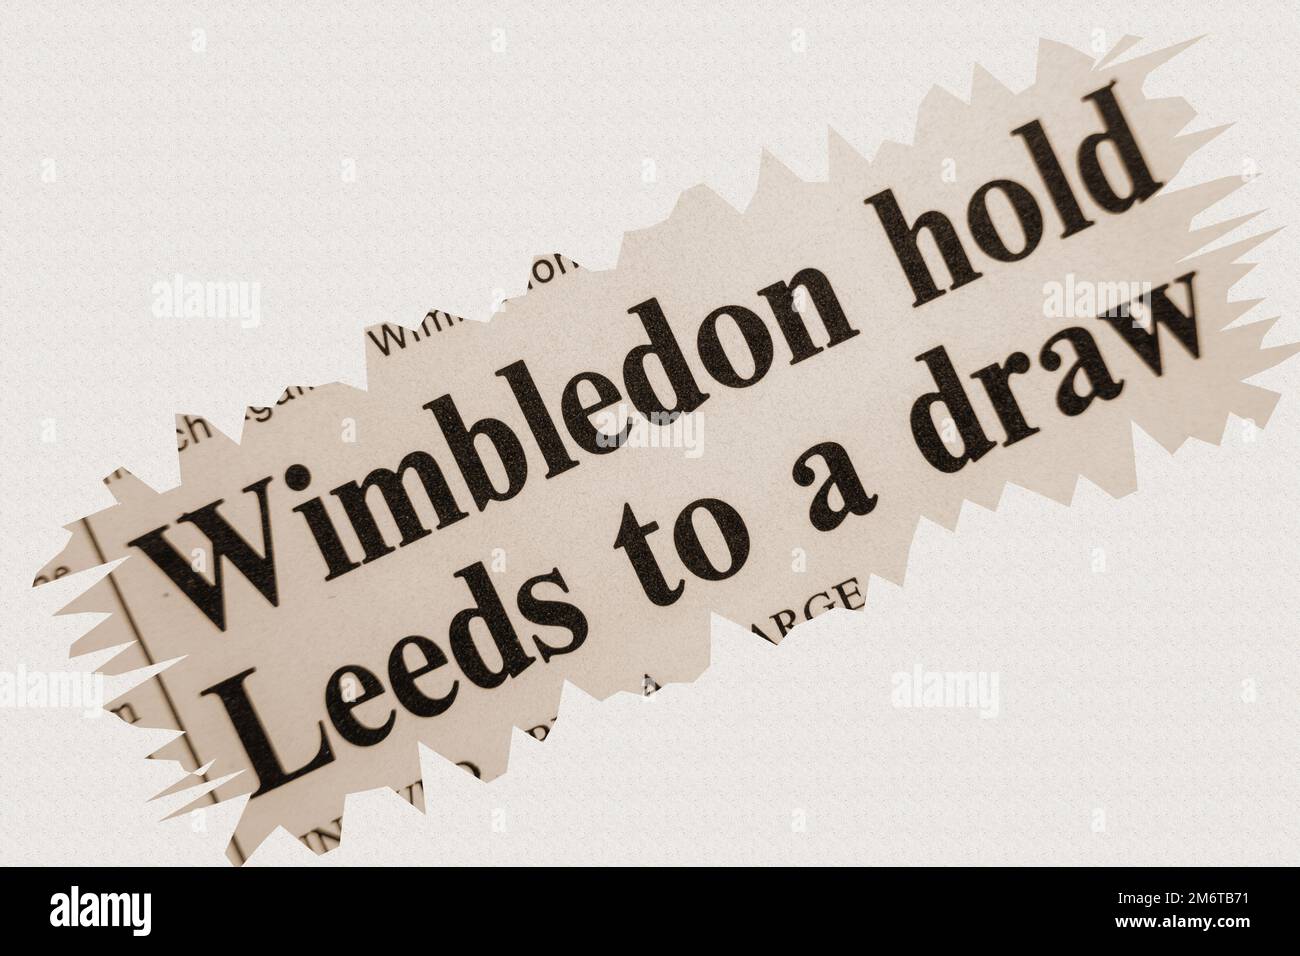 news story from 1975 newspaper headline article title - Wimbledon hold Leeds to a draw - sepia Stock Photo